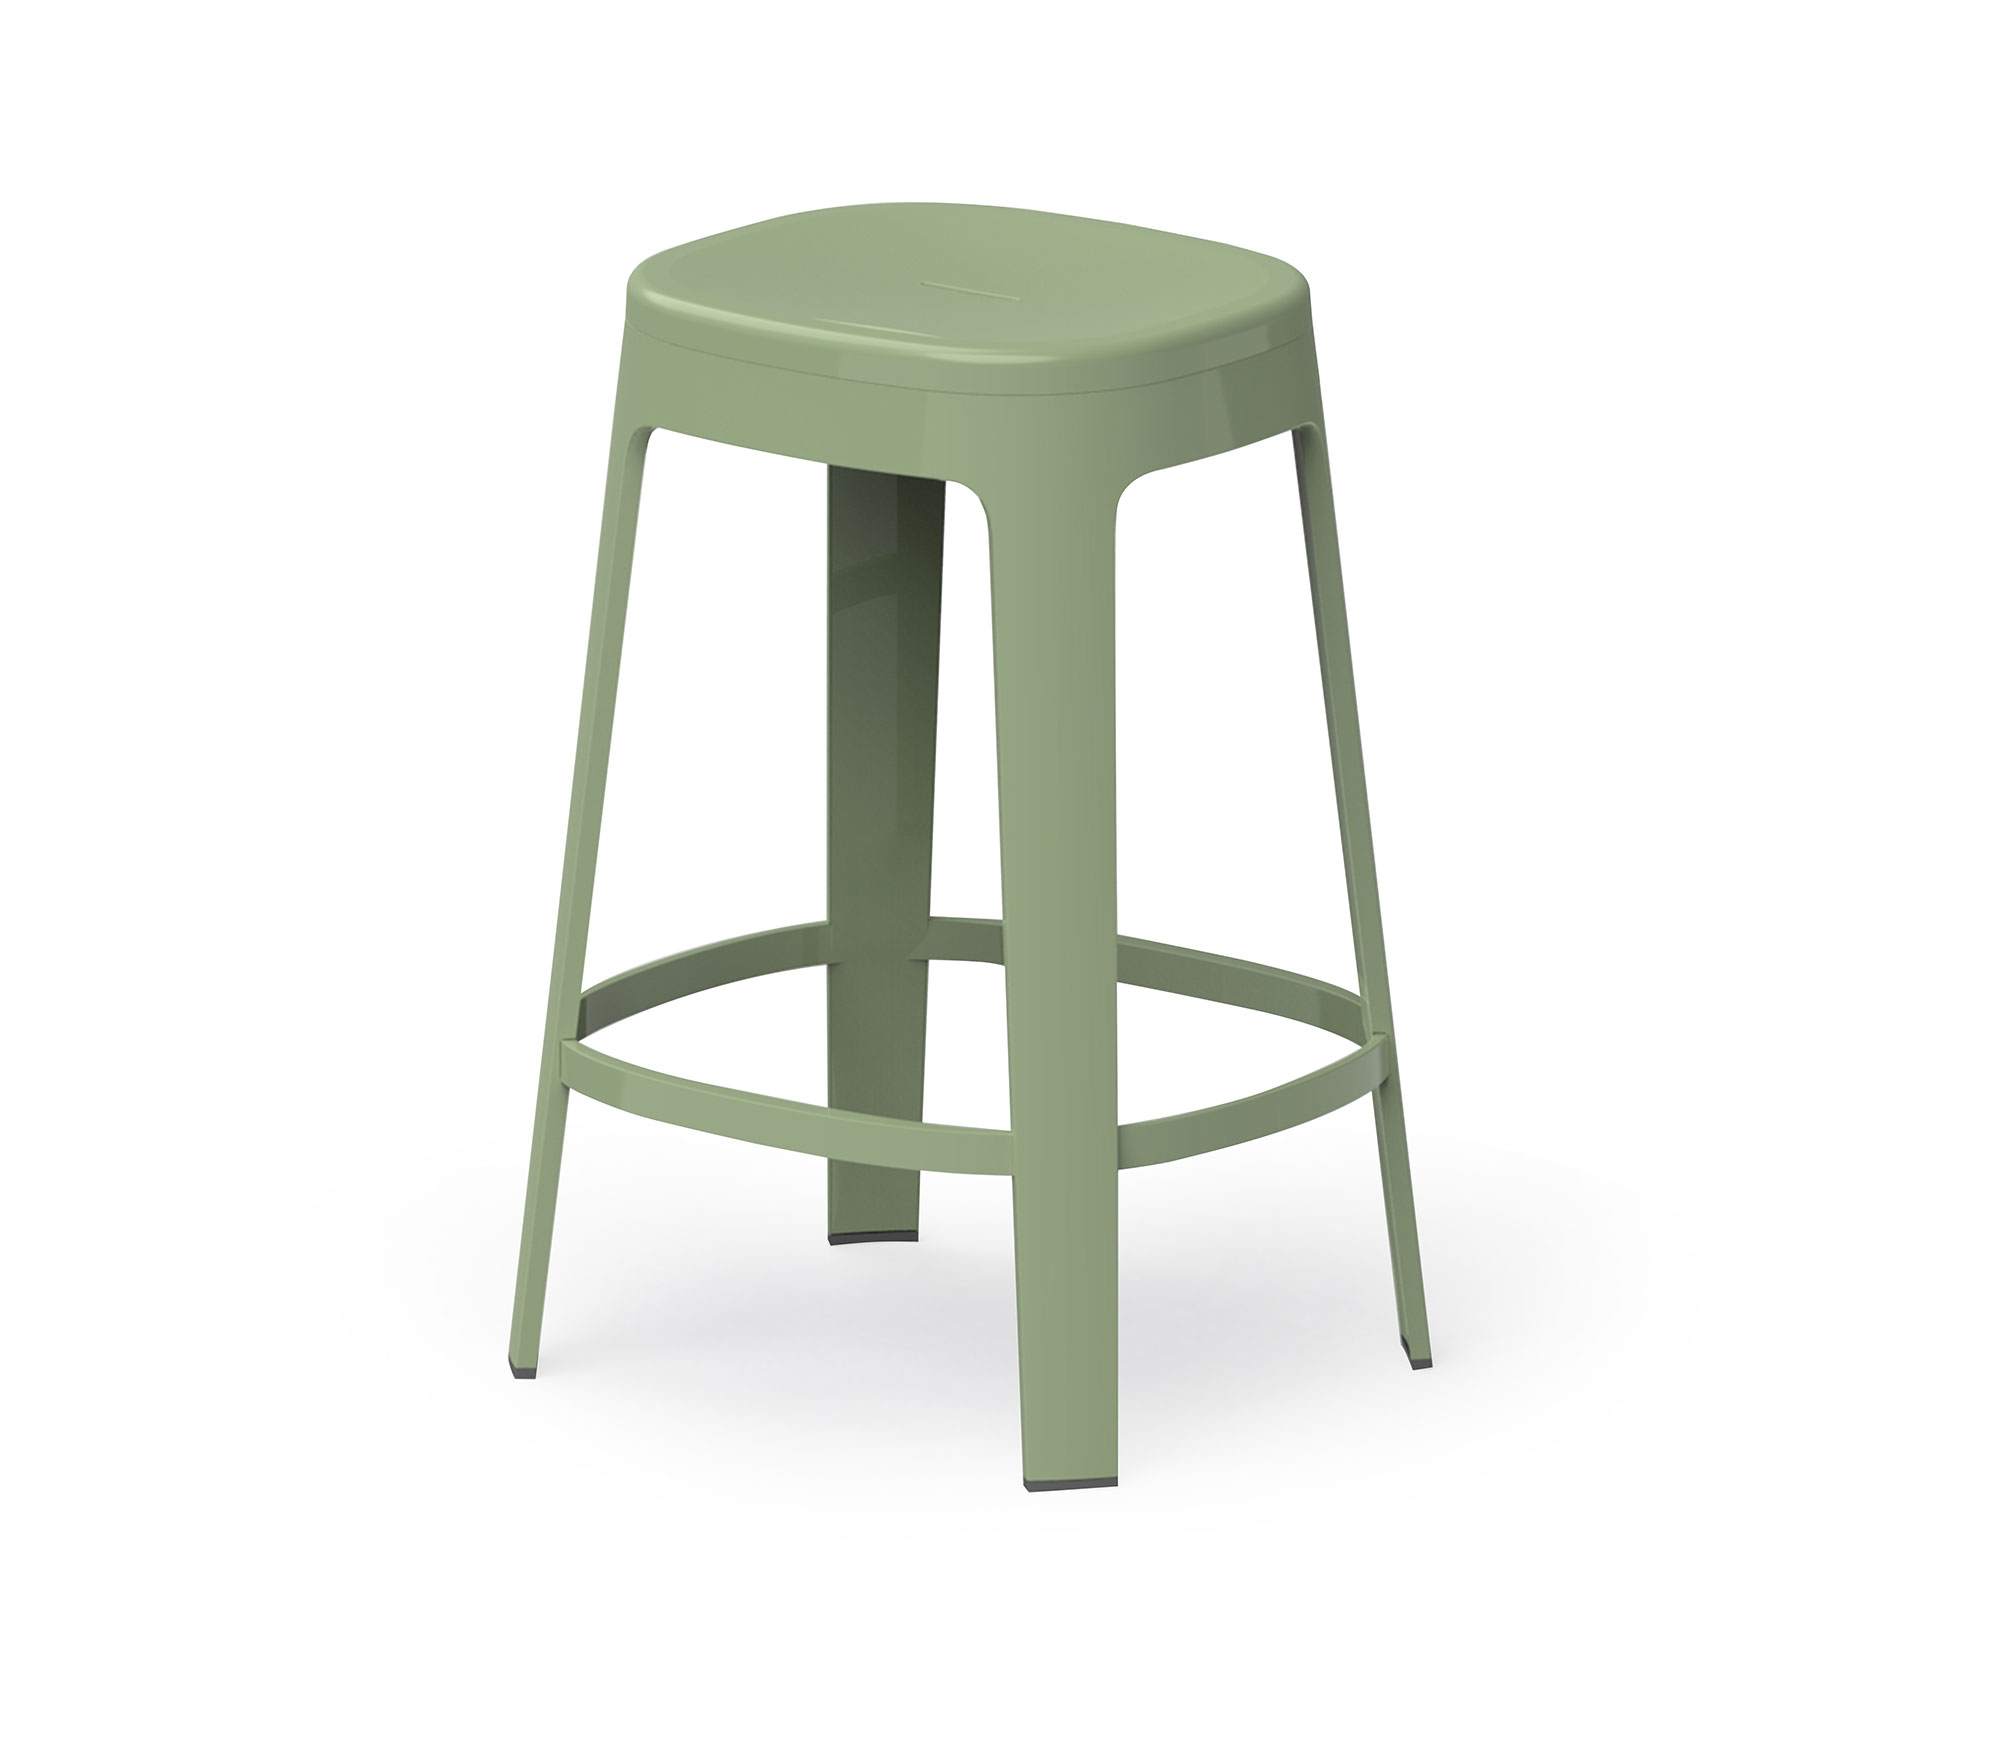 Counter stool "The Centerpiece" - design OMBRA COUNTER by RS Barcelona 